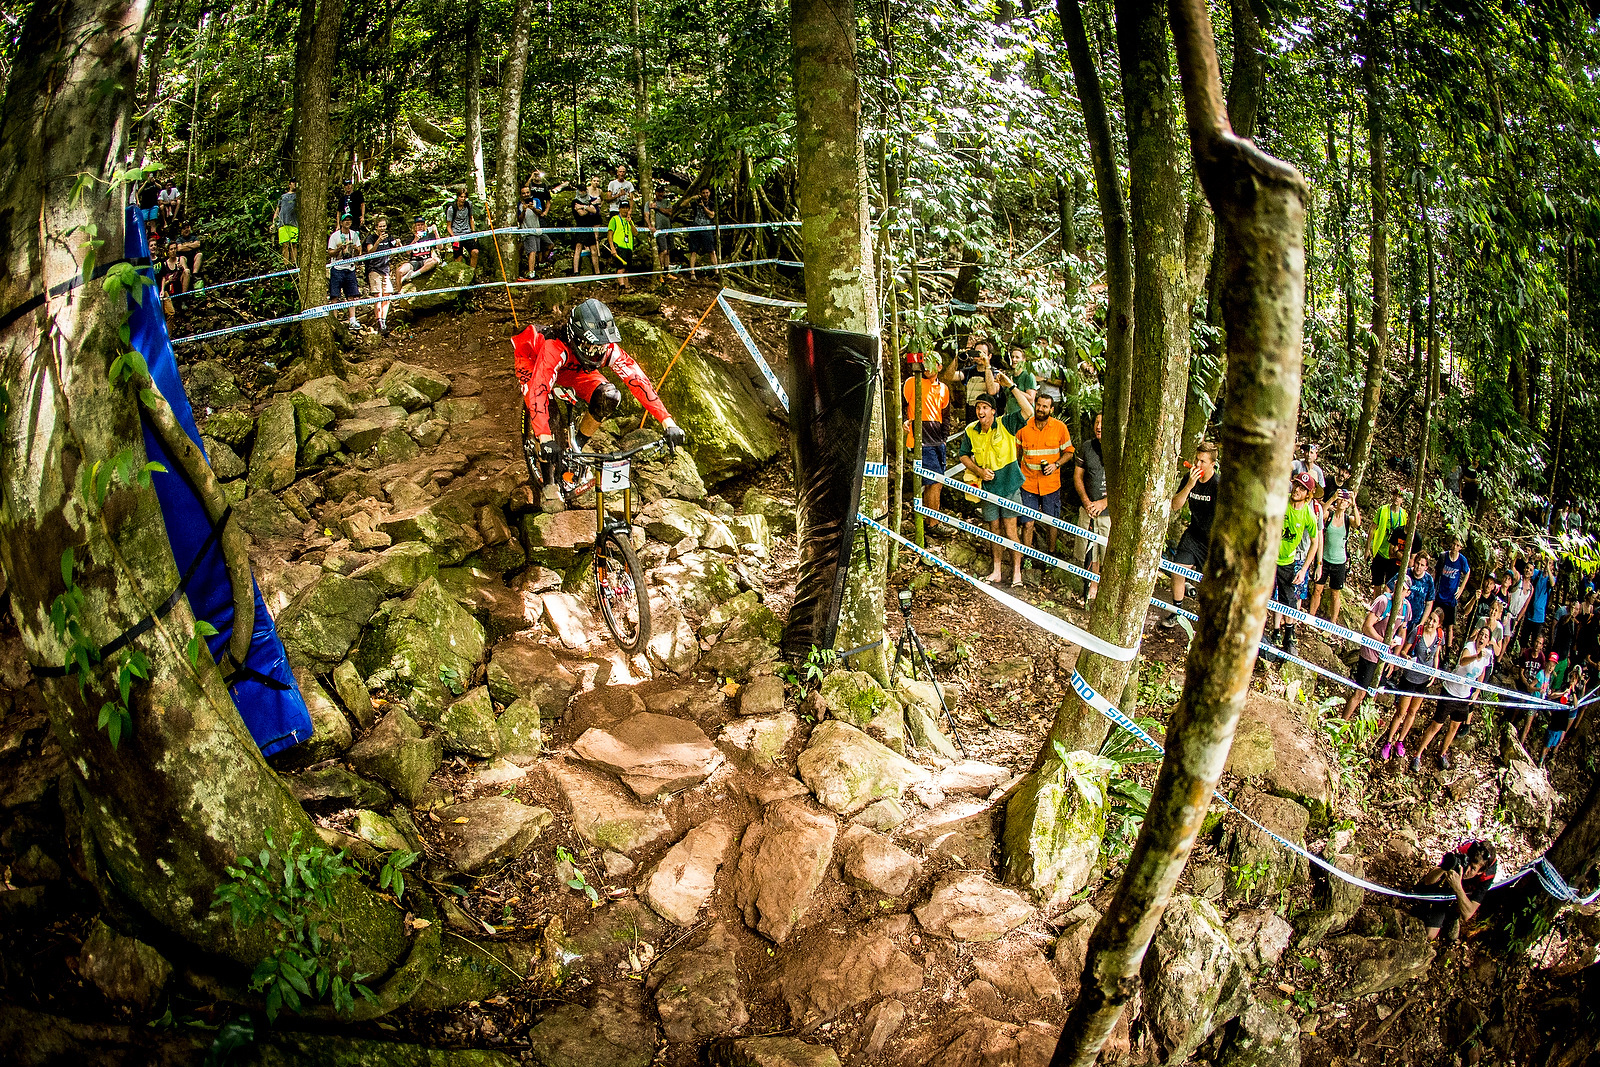 , during the 2016 UCI MTB World Cup, round two Cairns, Australia.